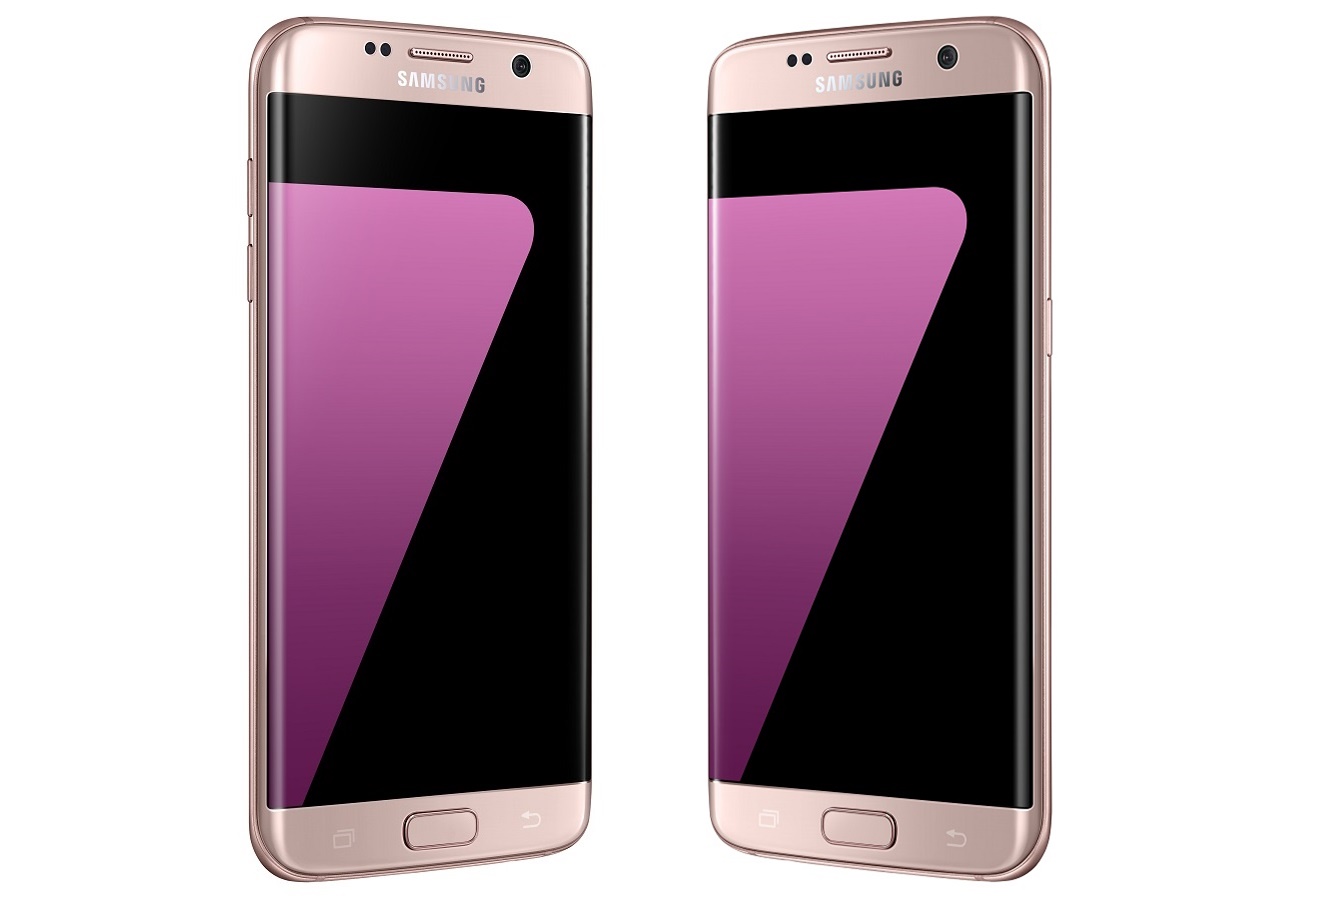 ... Galaxy S7 edge Now Available in Pink Gold in Malaysia | Lowyat.NET